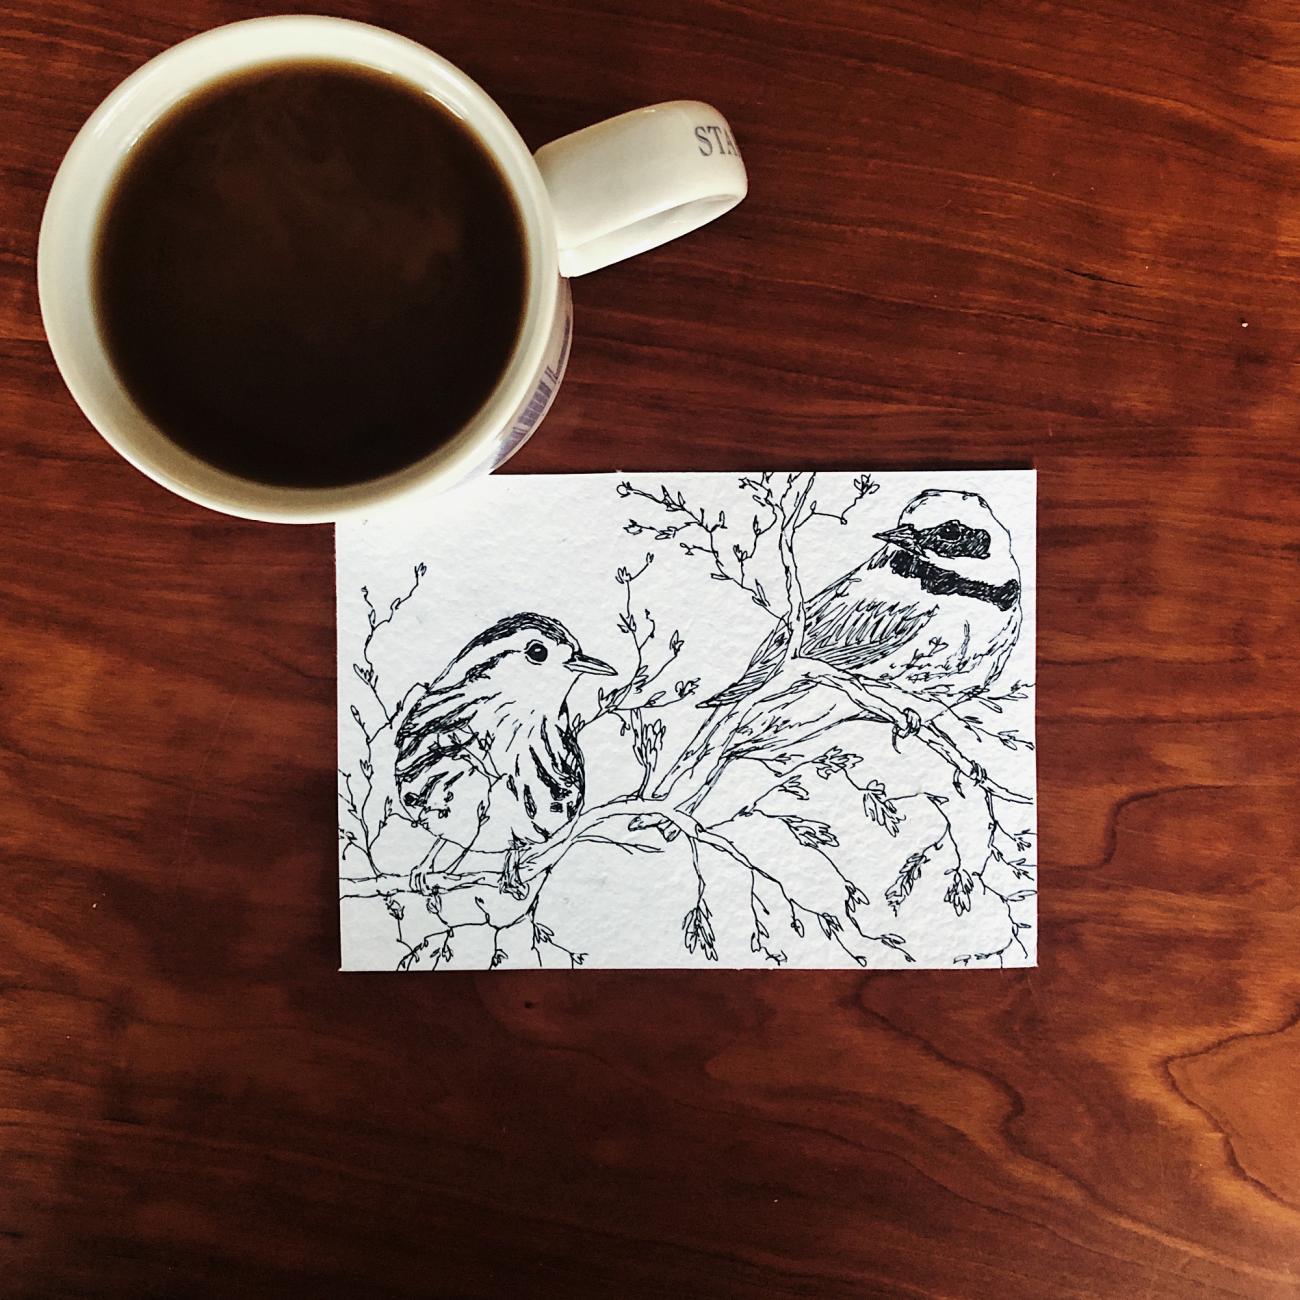  A mug of coffee placed next to a pen and ink drawing of two migratory birds perched on a tree branch